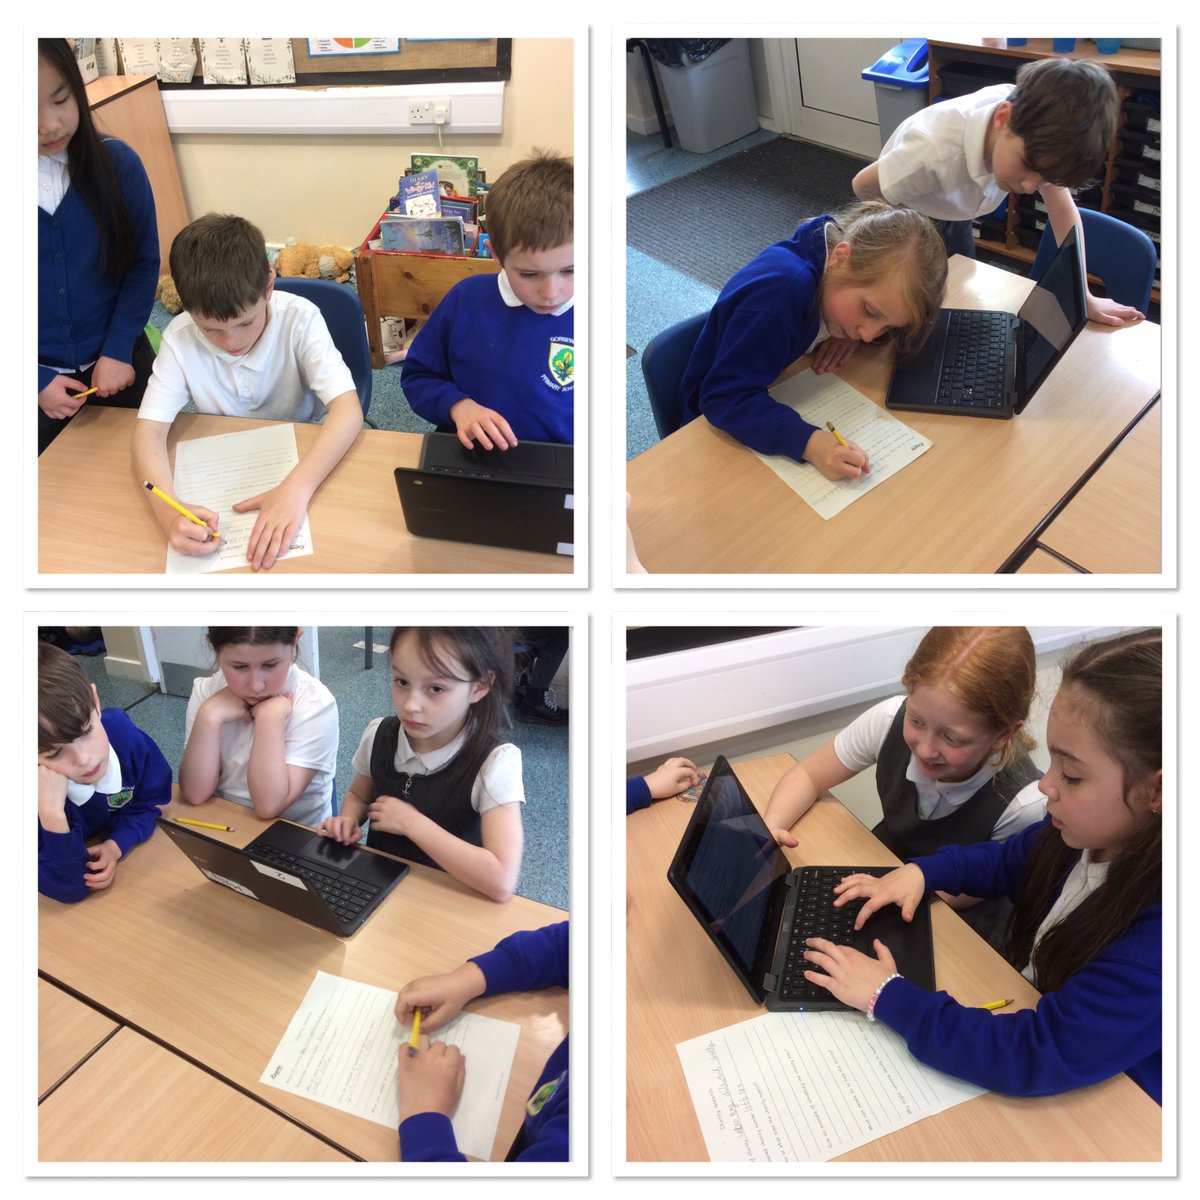 Year 3 have been researching local charities today! #GorsewoodPSHE